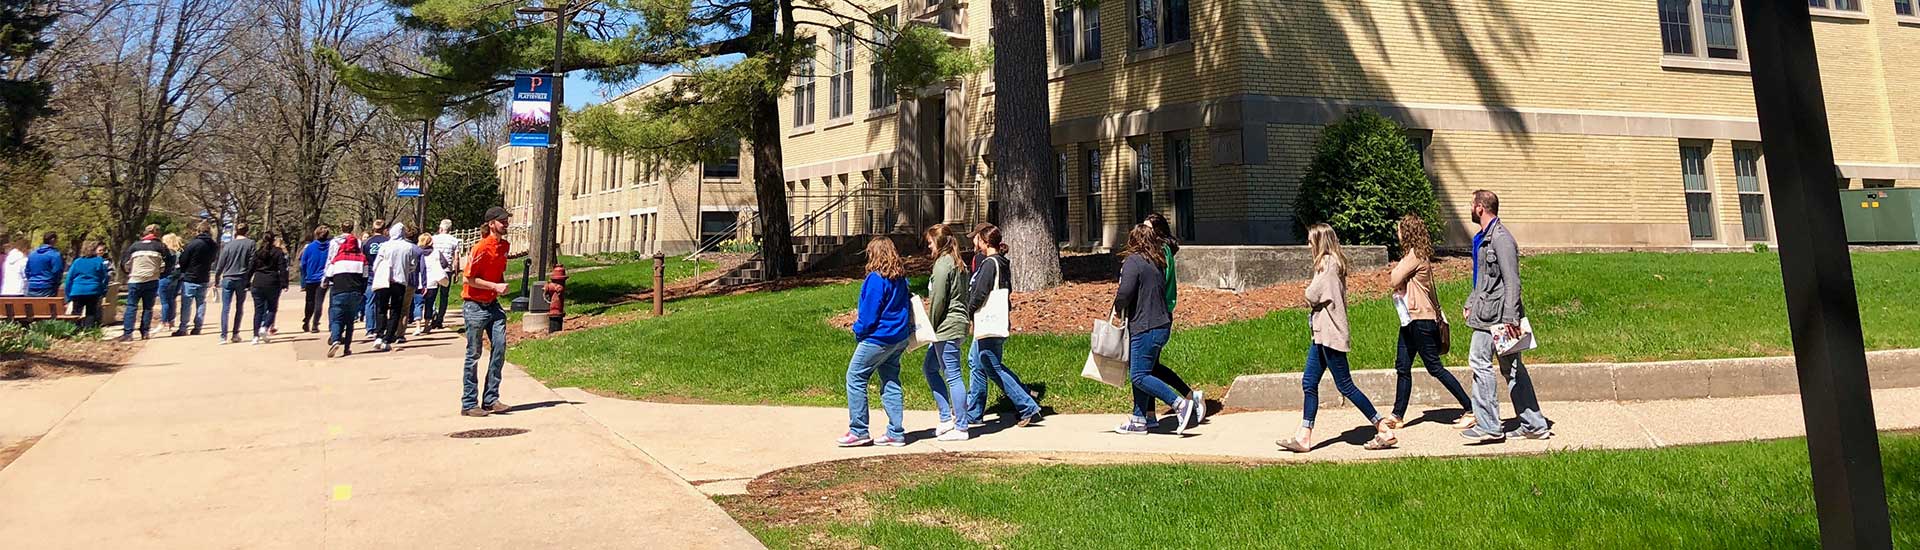 Spring campus students near Ullrich Hall